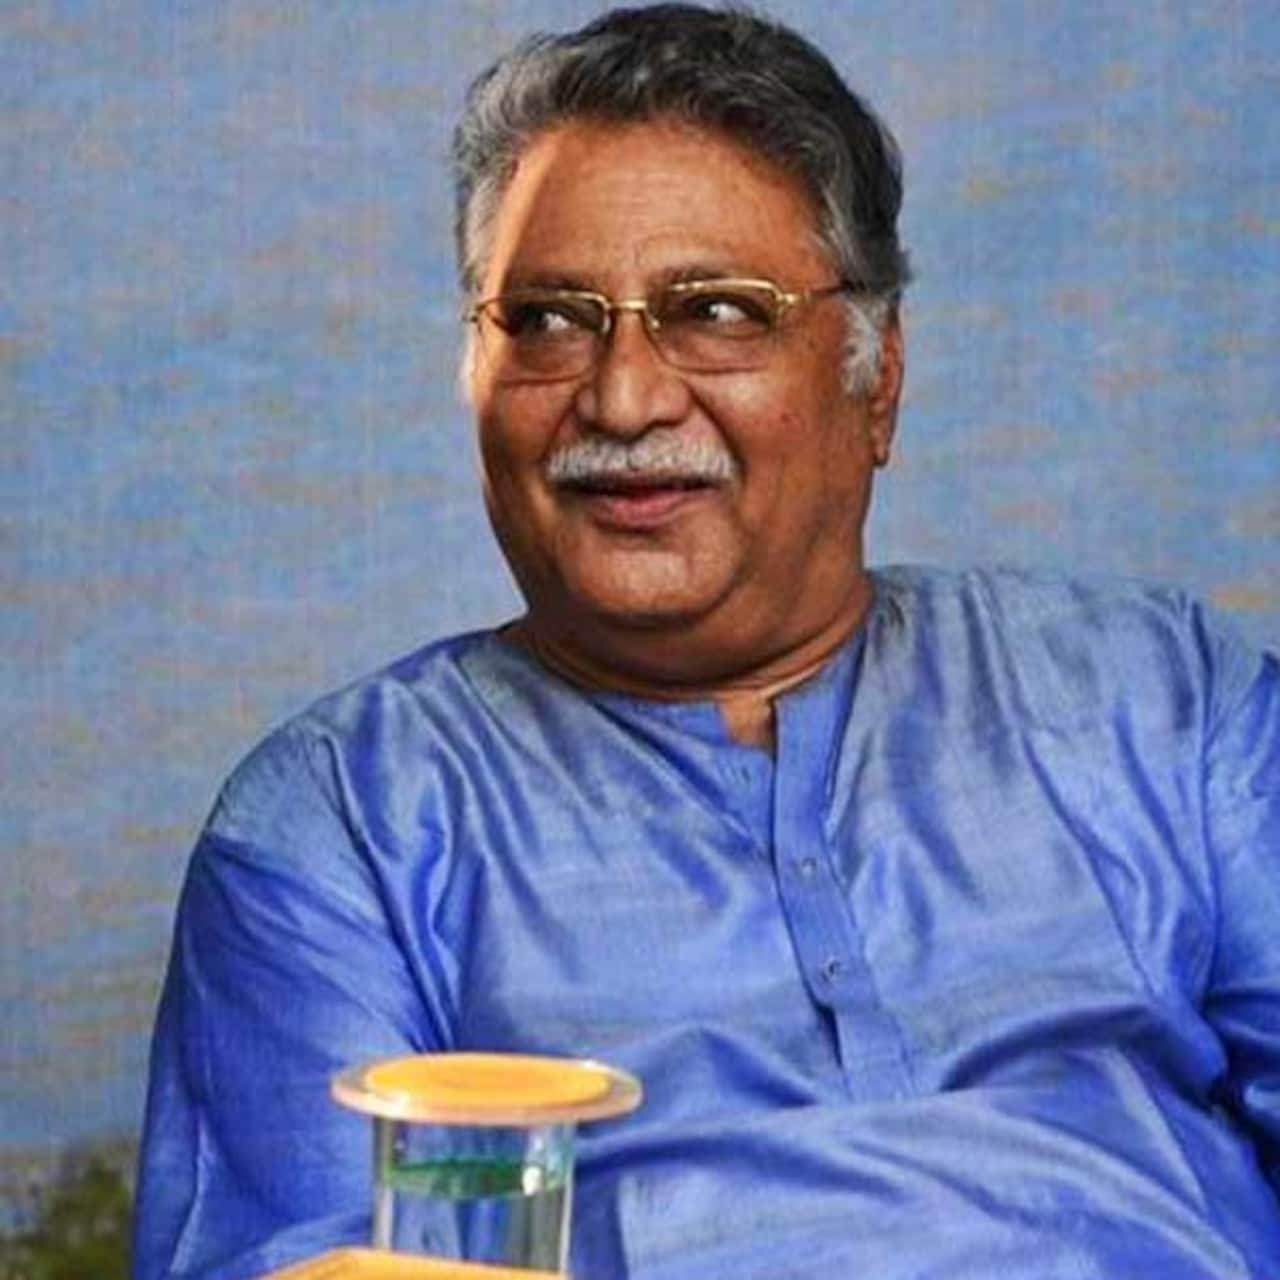 Vikram Gokhale started his acting journey from the Marathi theatre